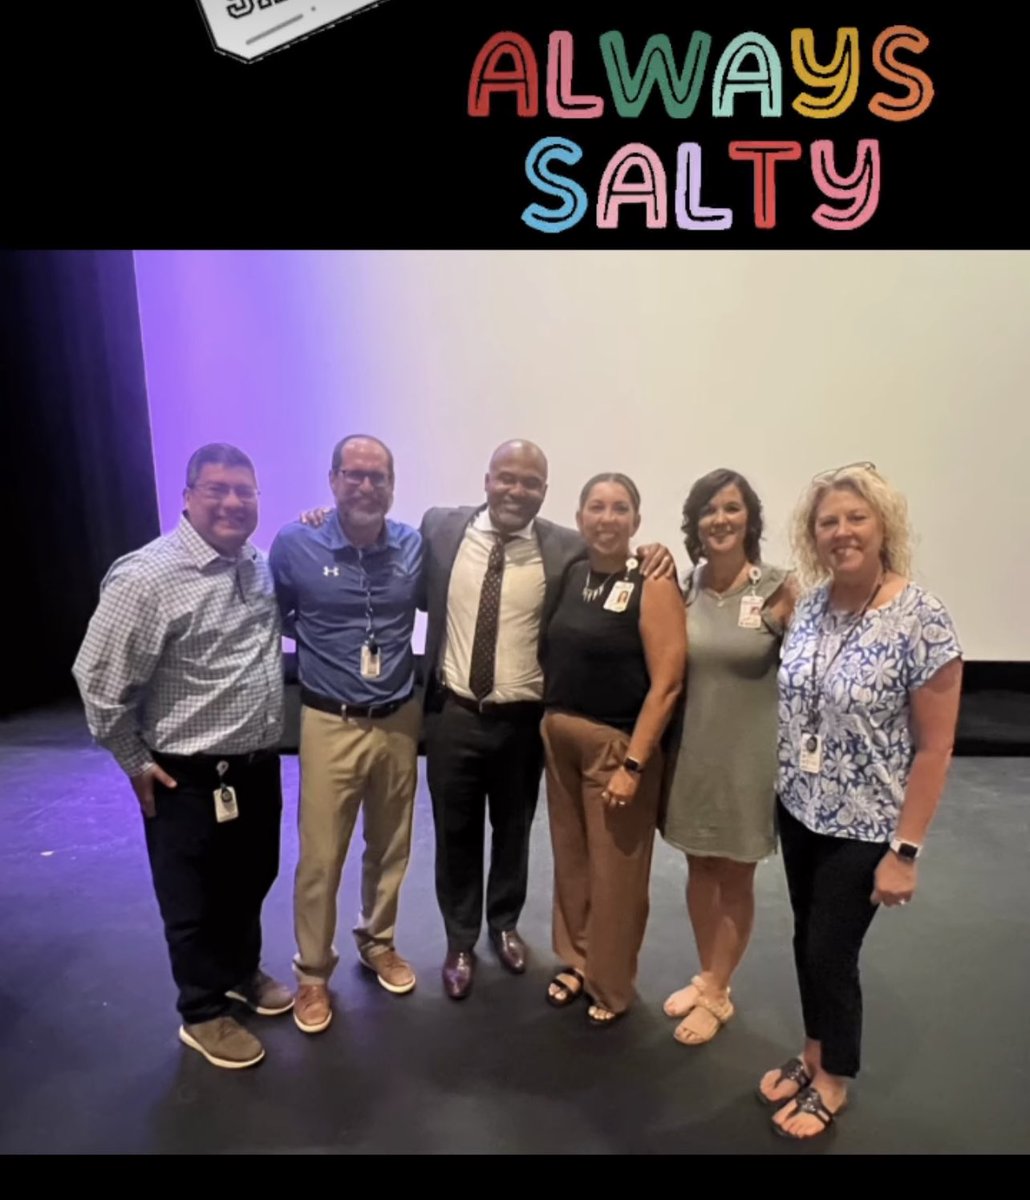 What an inspiring morning with Dr. Manny Scott. #nisdengage